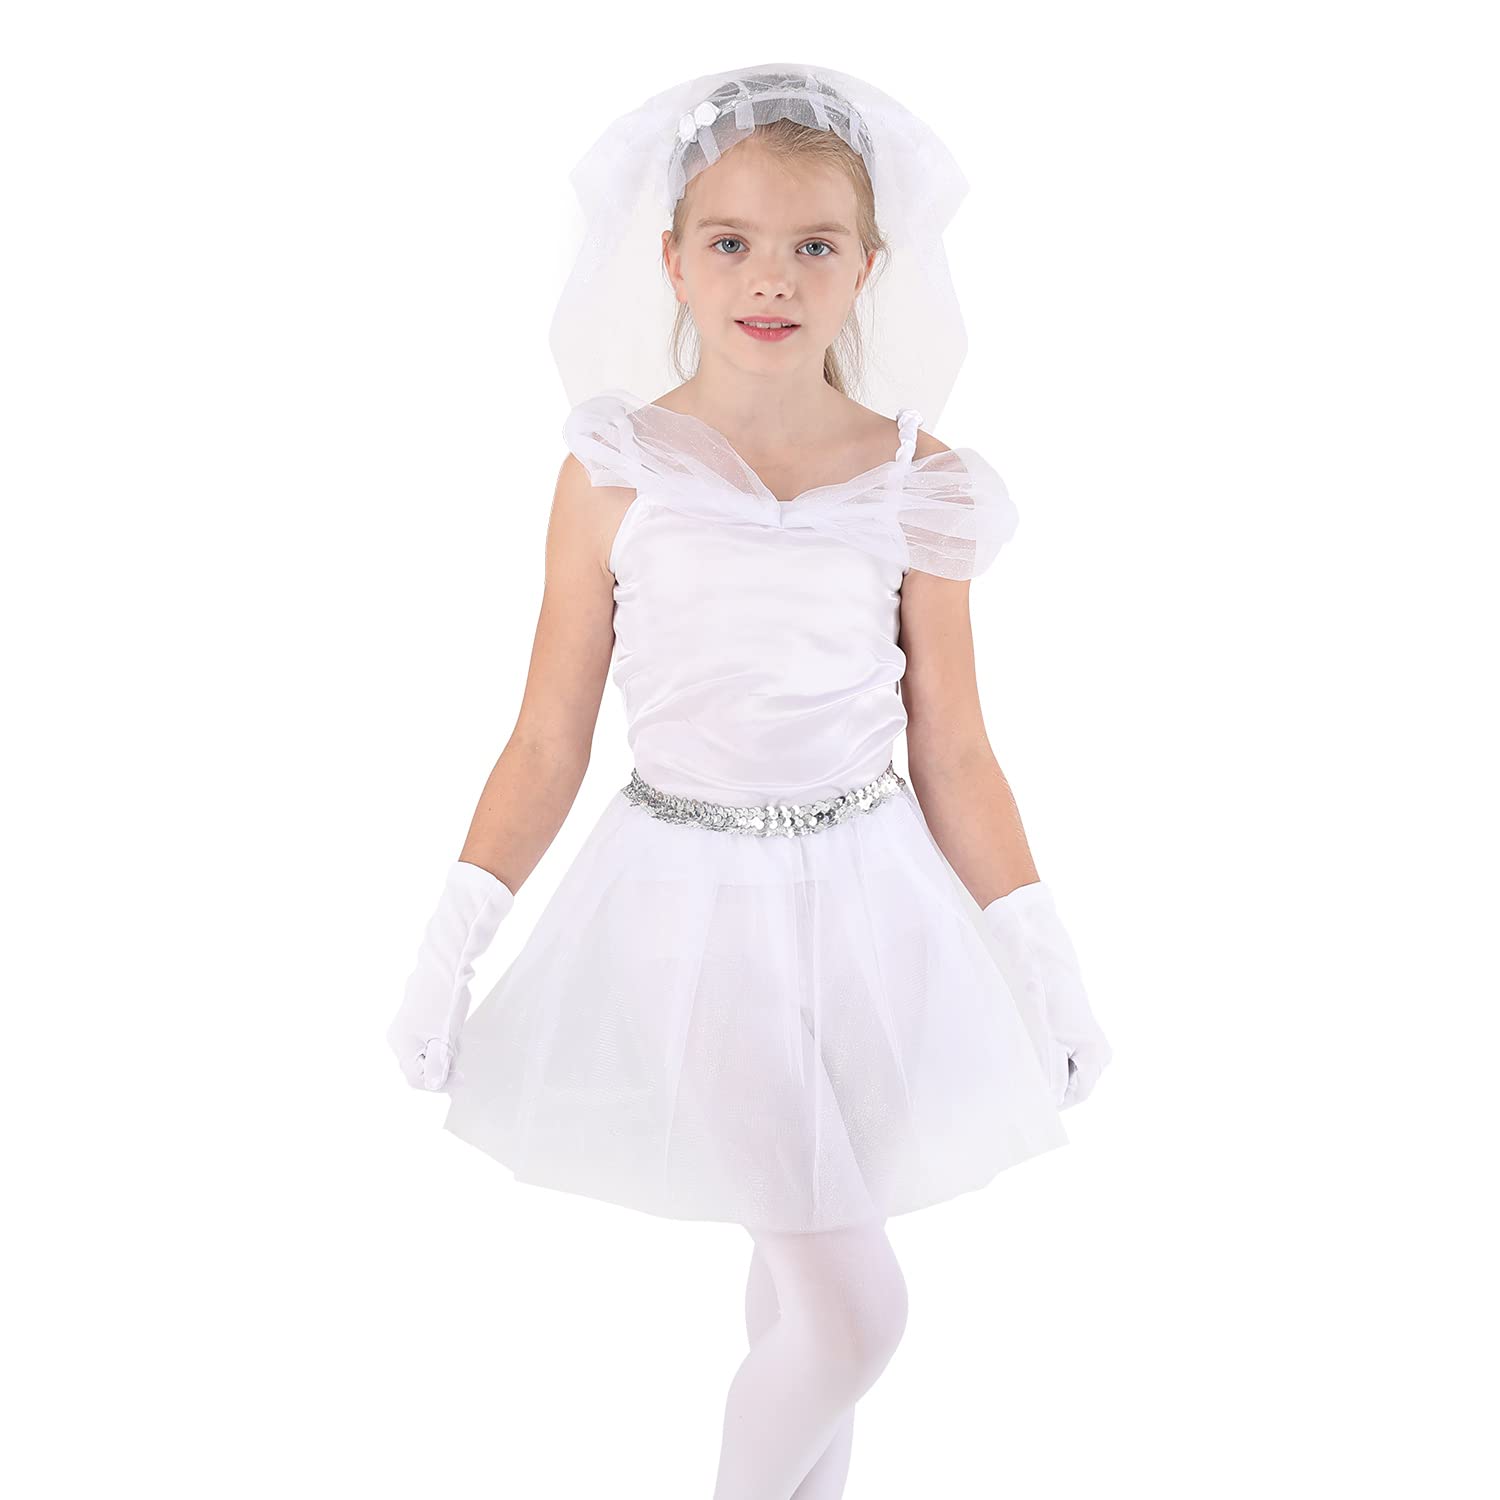 Toiijoy Girls Dress up Costume Set Princess,Fairy,Mermaid,Bride,Pop Star Costume for Little Girls Toddler Ages 3-6yrs